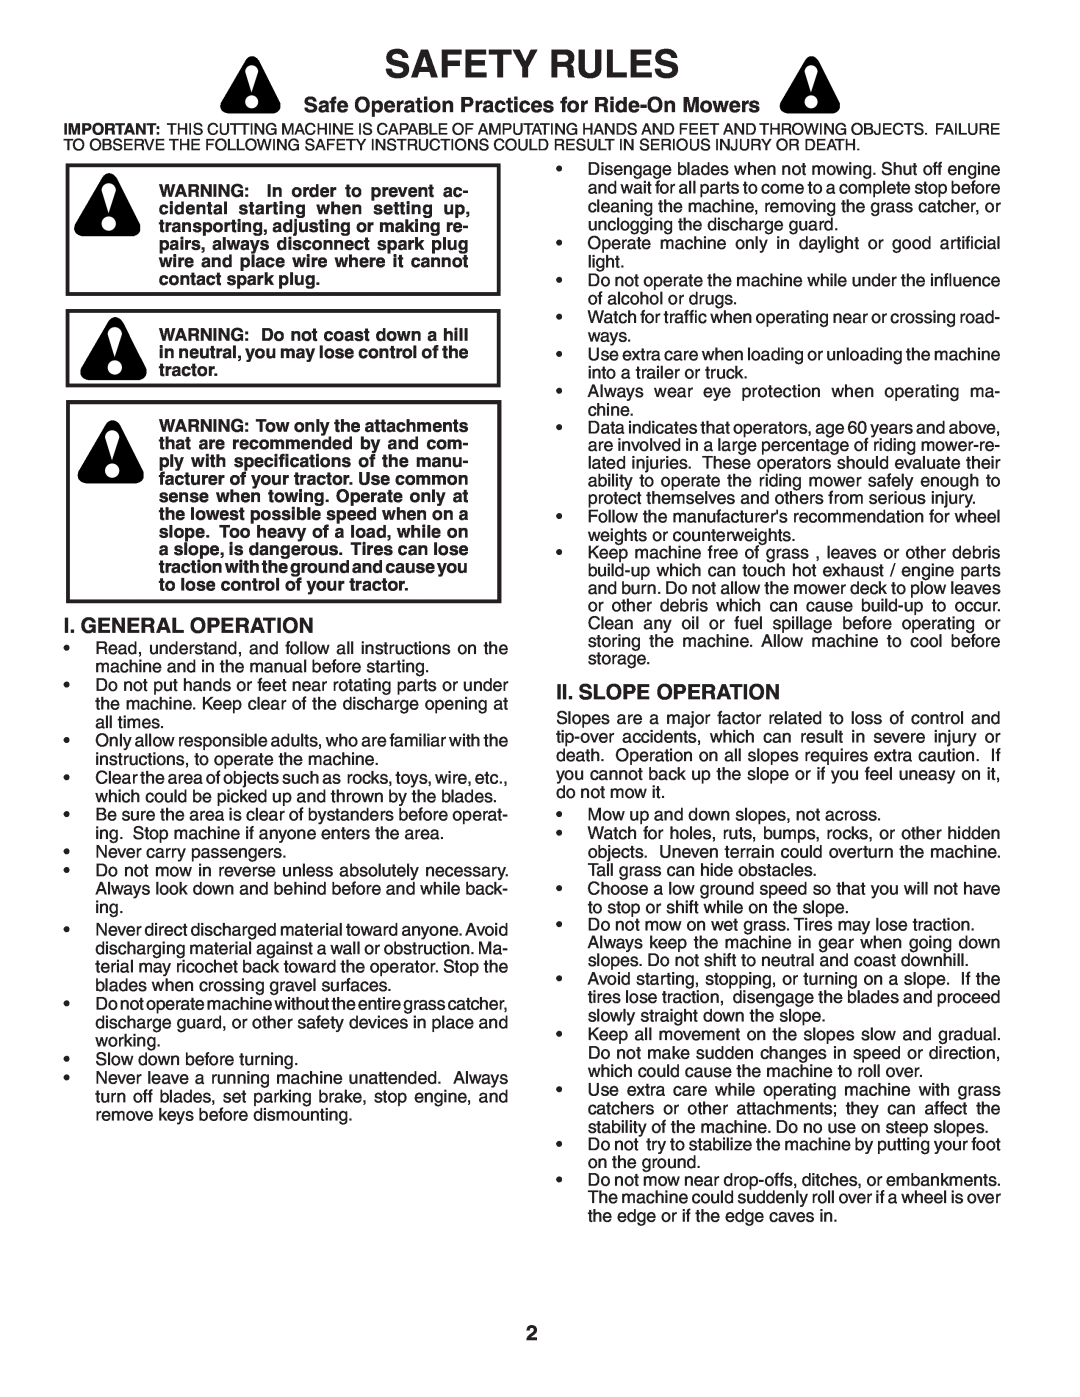 McCulloch MC16H38ST Safety Rules, Safe Operation Practices for Ride-On Mowers, I. General Operation, Ii. Slope Operation 